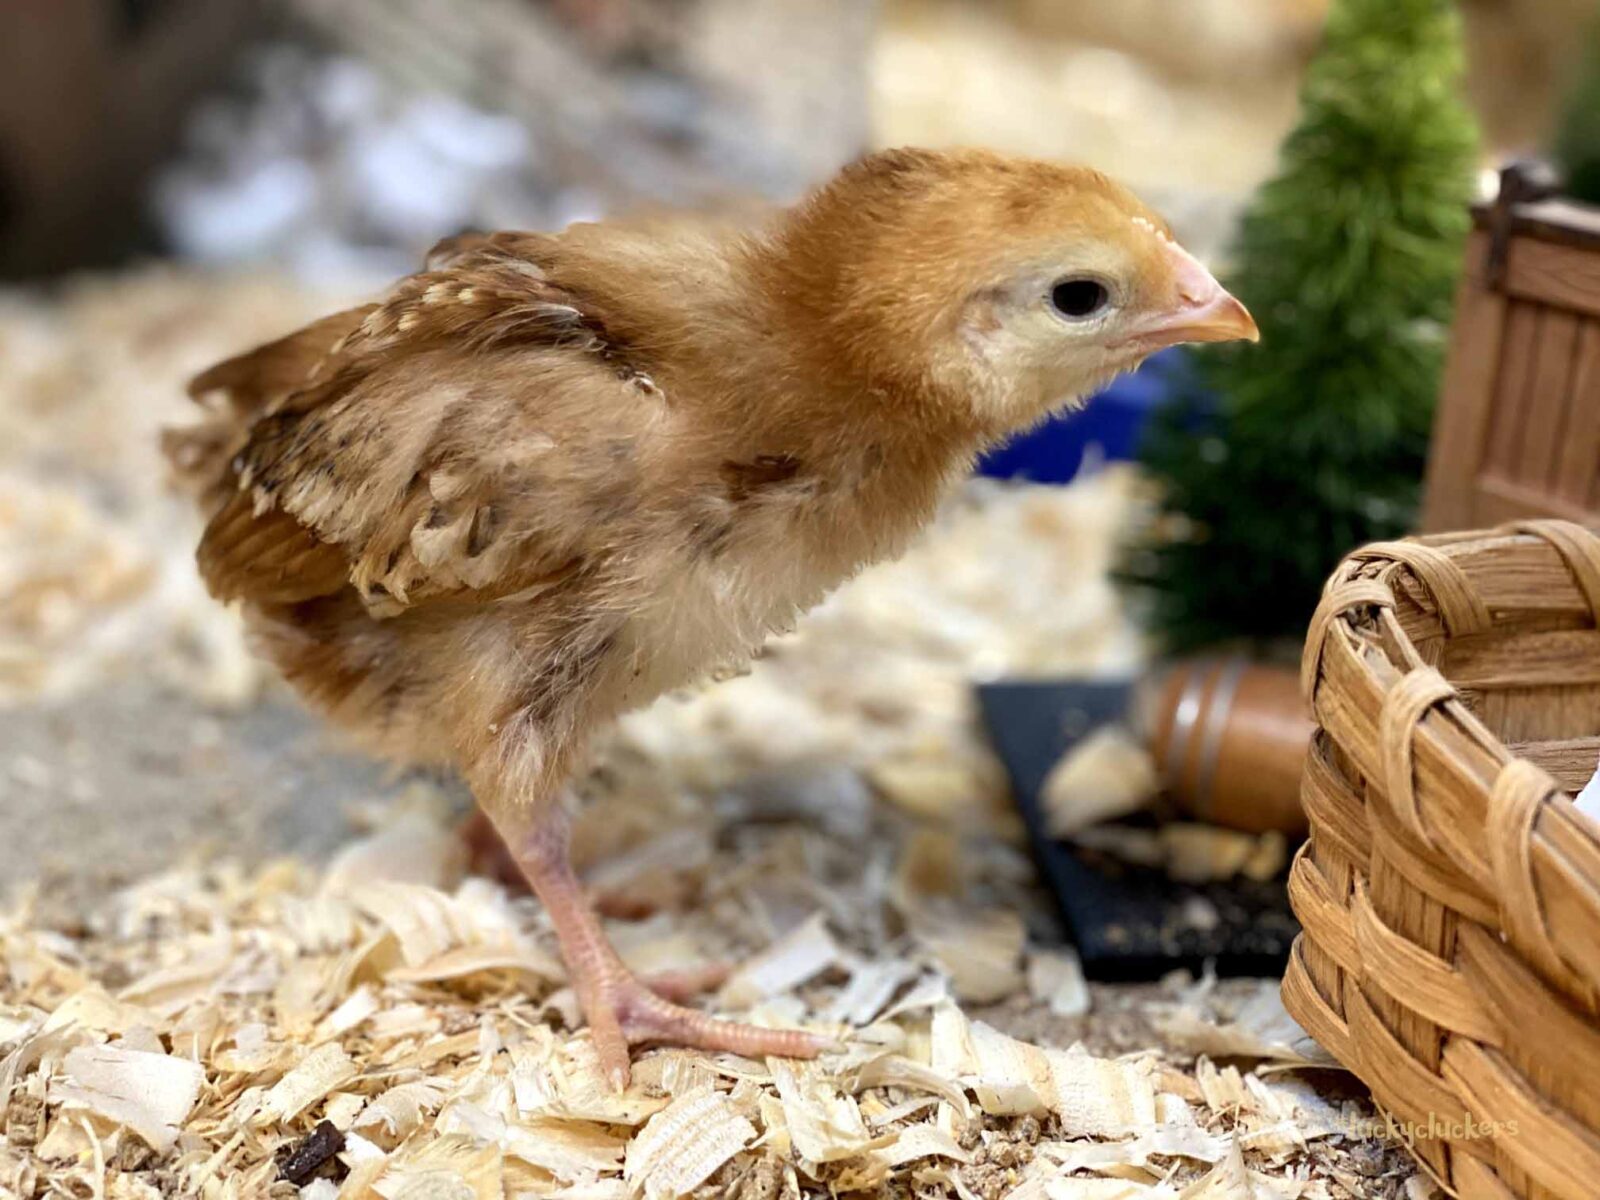 rhode island red chicks in their awkward stage image